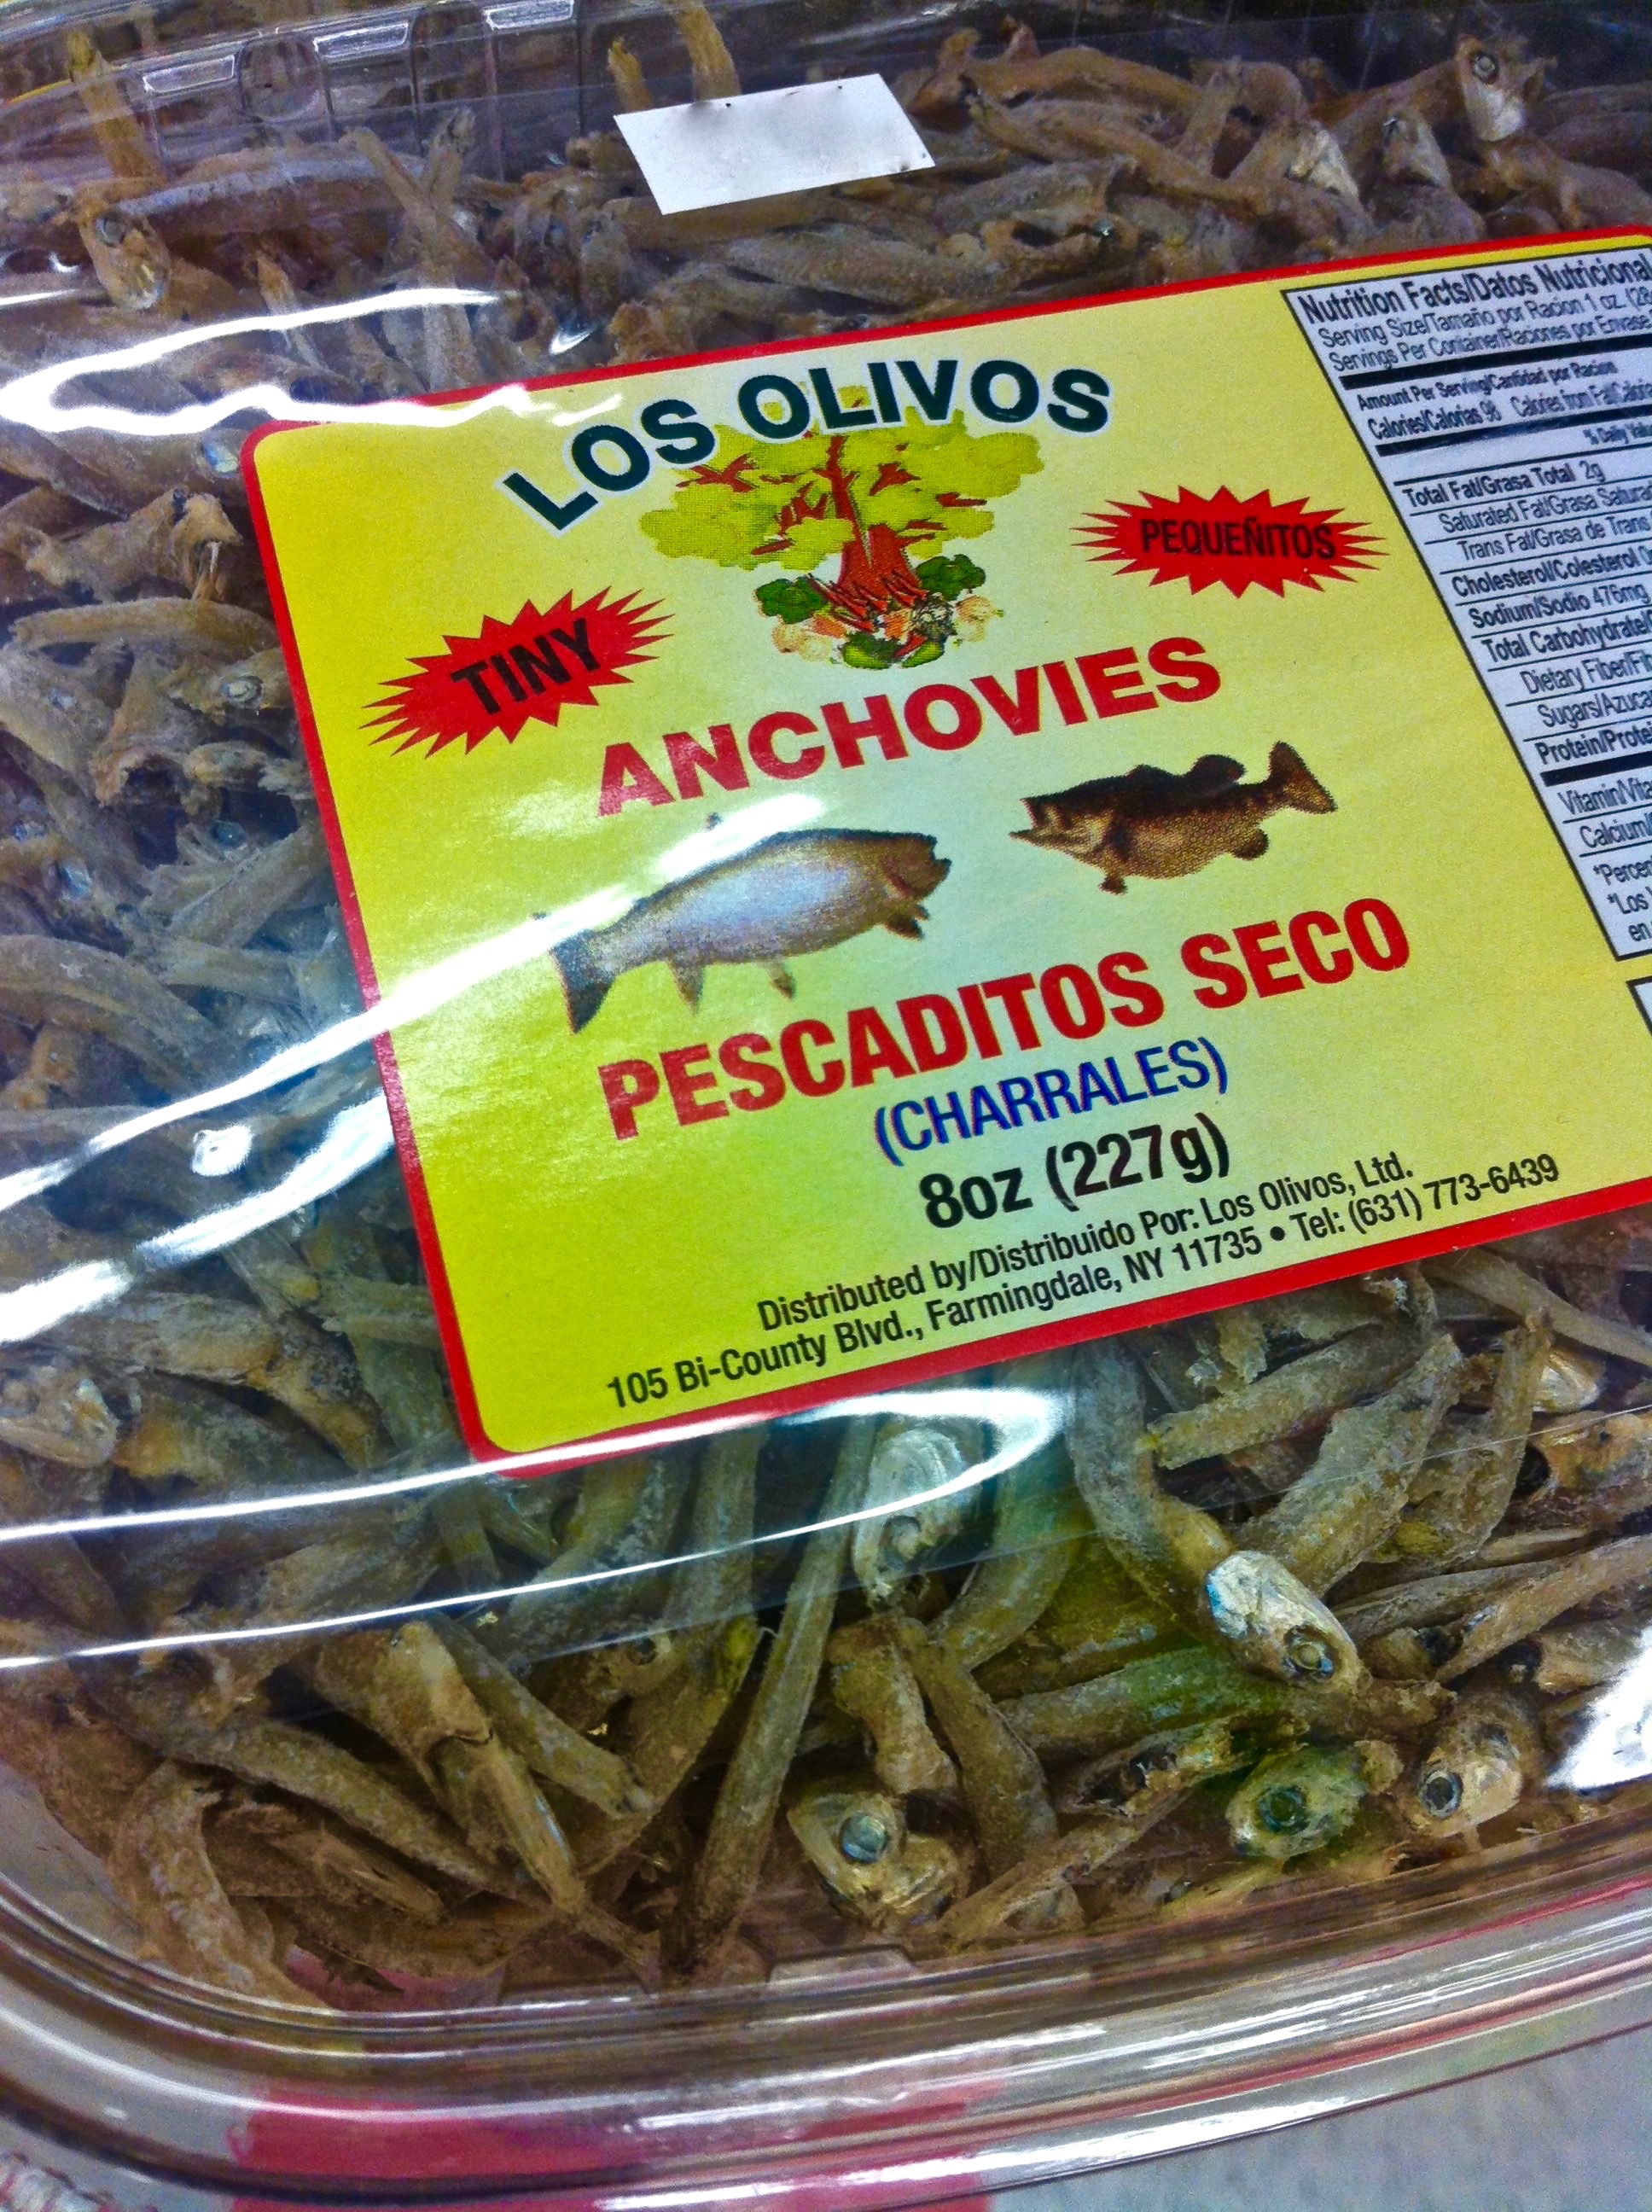 Anchovies is the name sometimes applied to the Mexican Charales